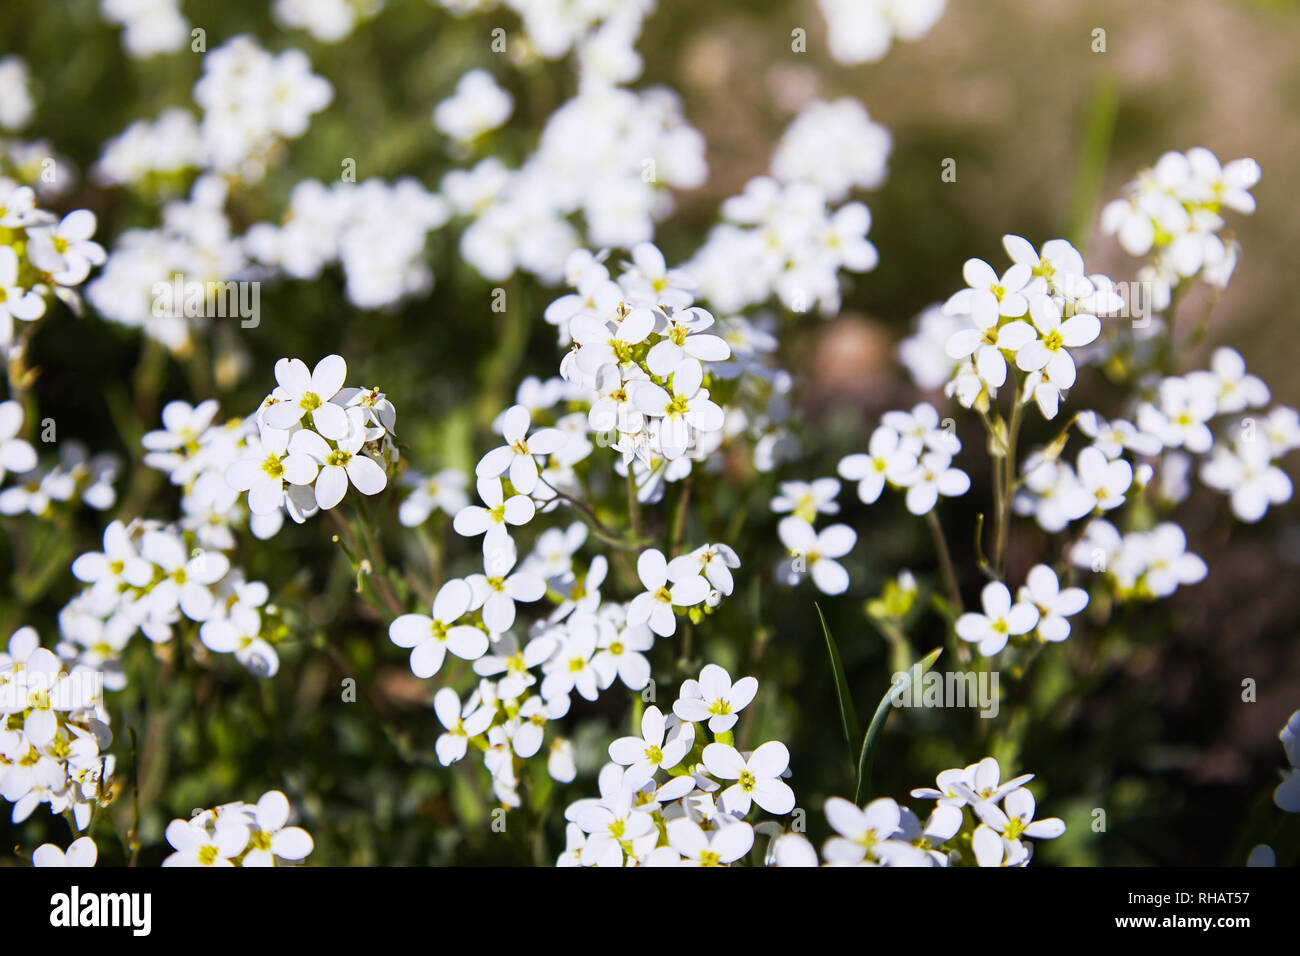 White arabis caucasica flowers in the garden. Arabis caucasica ornamental garden white flowers, mountain rock cress ground cover plant in bloom Stock Photo